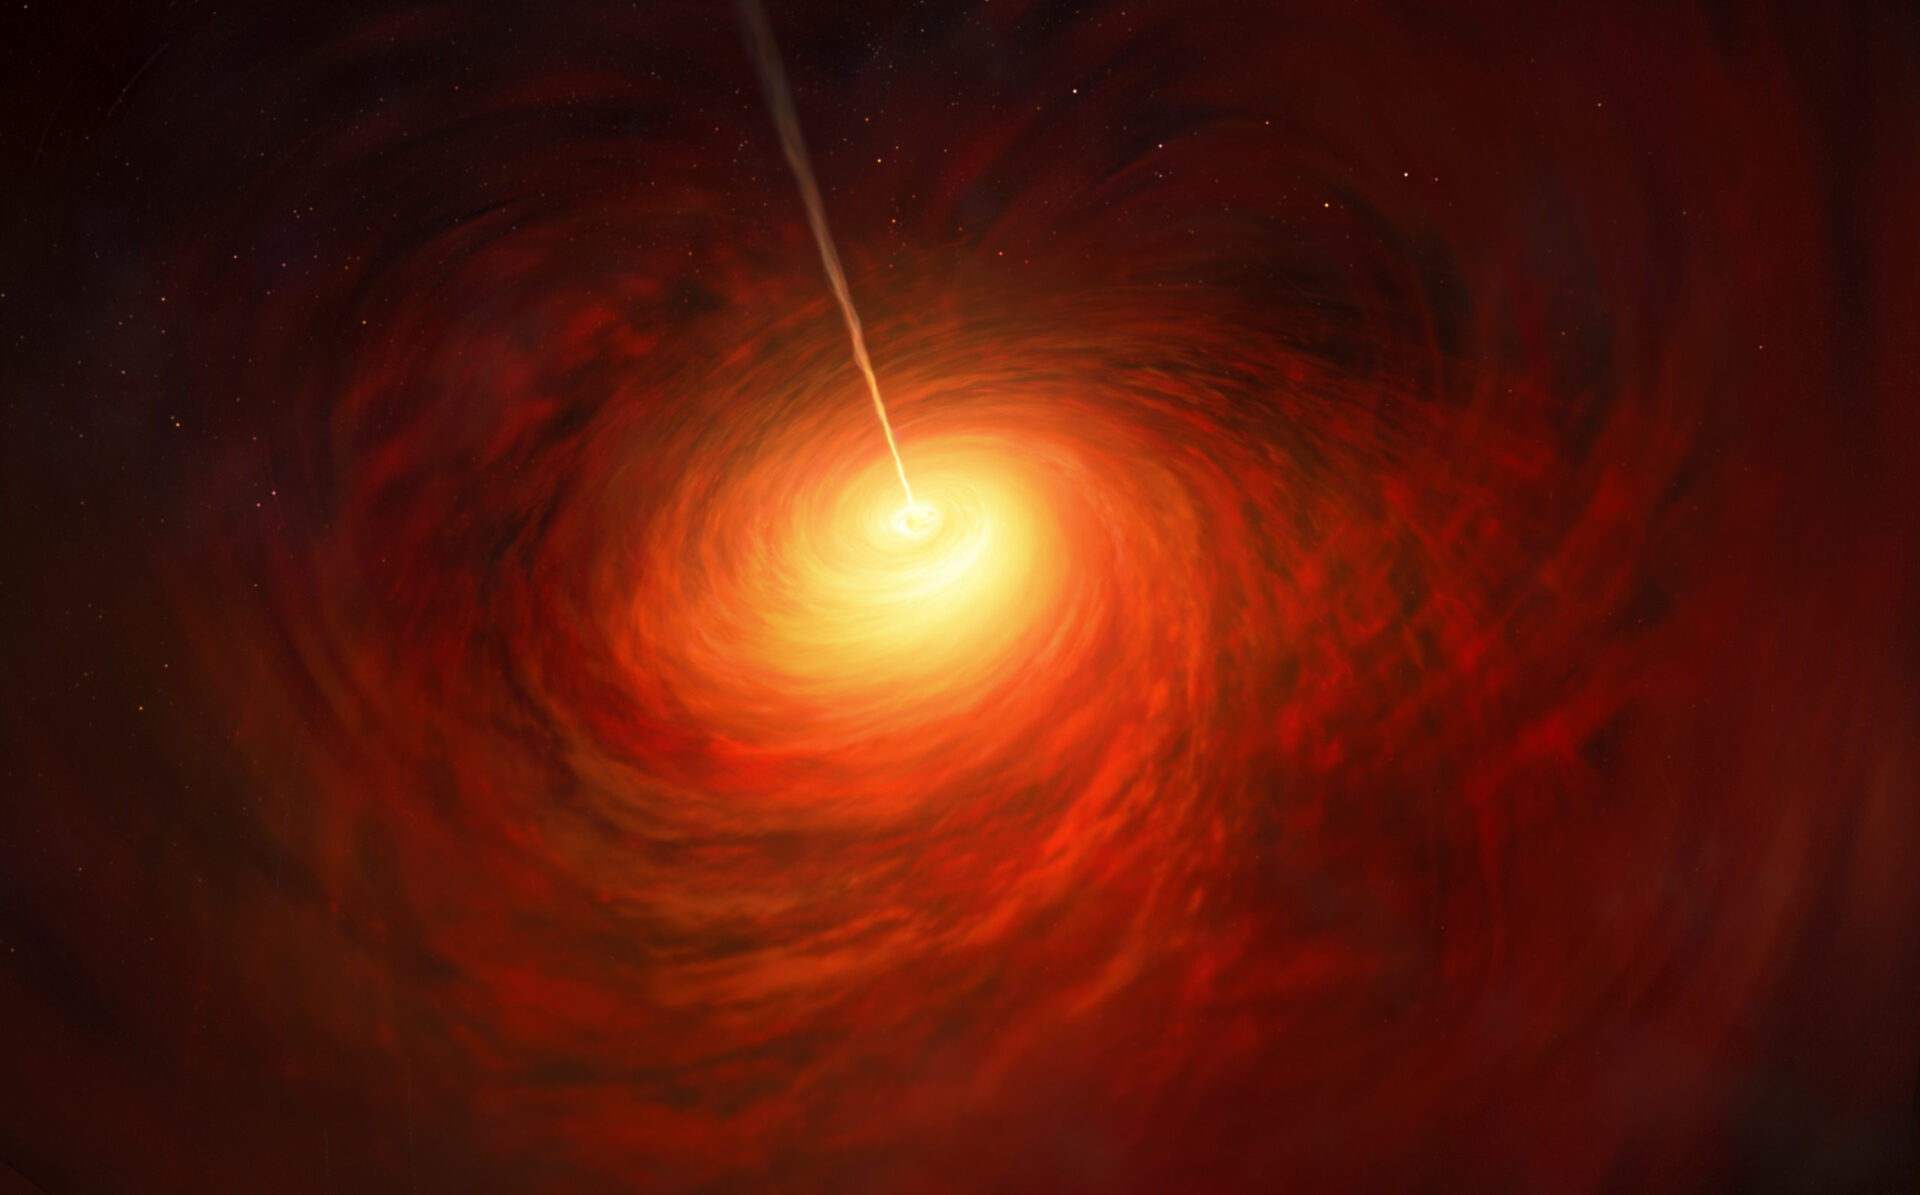 This artist’s impression depicts the black hole at the heart of the enormous elliptical galaxy Messier 87 (M87). This black hole was chosen as the object of paradigm-shifting observations by the Event Horizon Telescope. The superheated material surrounding the black hole is shown, as is the relativistic jet launched by M87’s black hole. Credit: ESO/M. Kornmesser